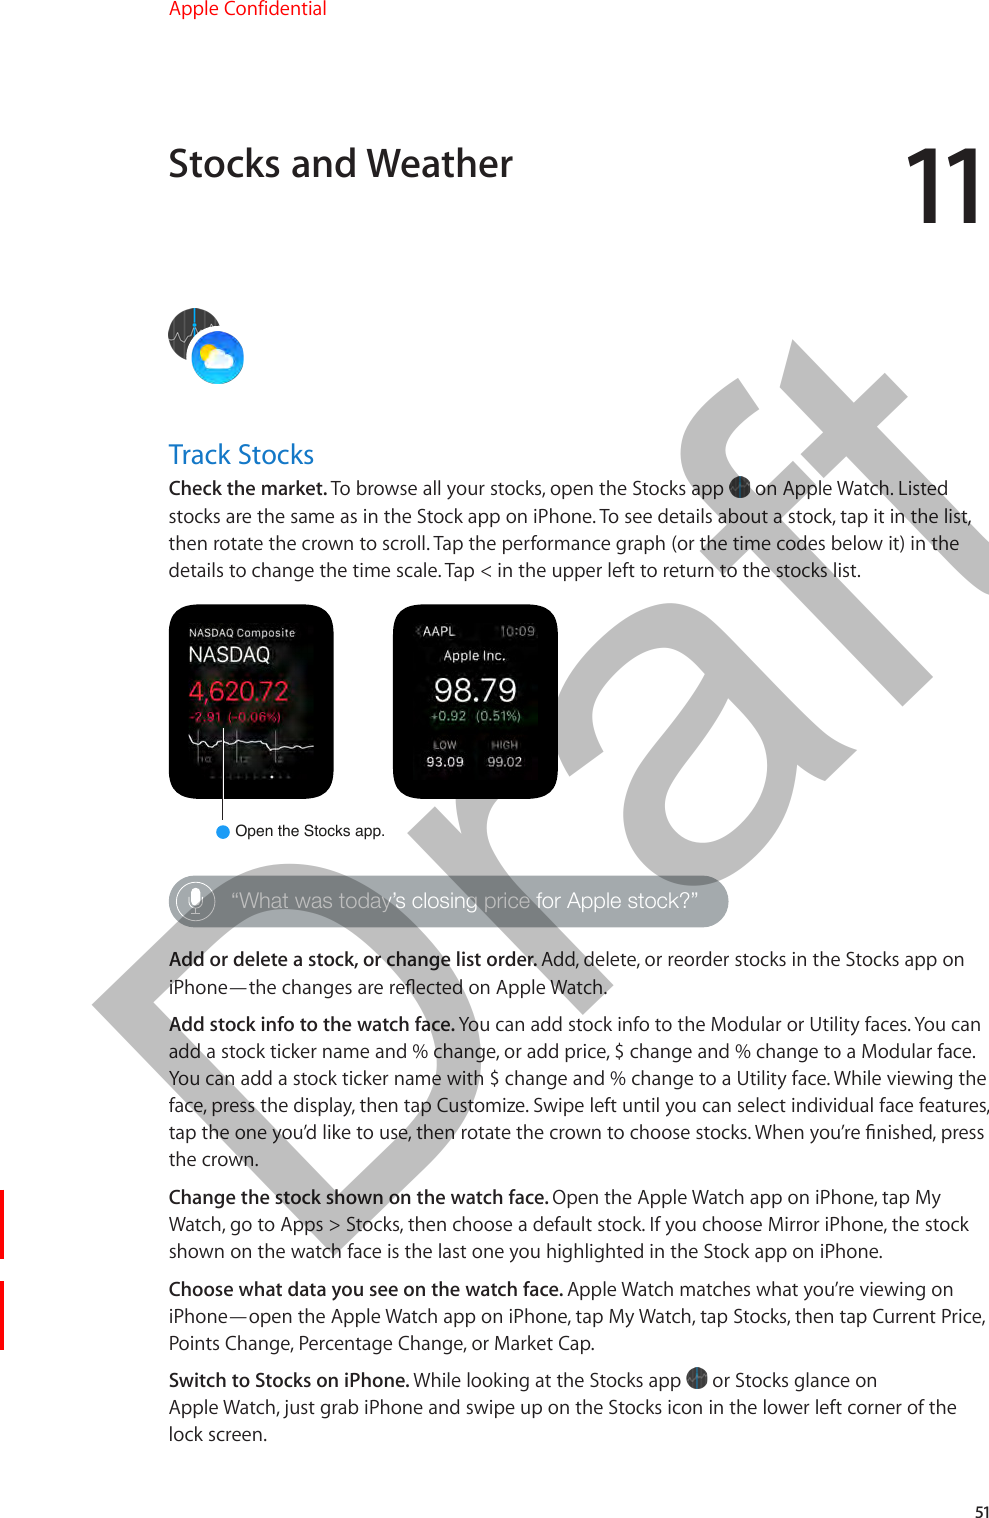 1151Track StocksCheck the market. To browse all your stocks, open the Stocks app   on Apple Watch. Listed stocks are the same as in the Stock app on iPhone. To see details about a stock, tap it in the list, then rotate the crown to scroll. Tap the performance graph (or the time codes below it) in the details to change the time scale. Tap &lt; in the upper left to return to the stocks list.Open the Stocks app.“What was today’s closing price for Apple stock?”Add or delete a stock, or change list order. Add, delete, or reorder stocks in the Stocks app on iPhone—the changes are reected on Apple Watch.Add stock info to the watch face. You can add stock info to the Modular or Utility faces. You can add a stock ticker name and % change, or add price, $ change and % change to a Modular face. You can add a stock ticker name with $ change and % change to a Utility face. While viewing the face, press the display, then tap Customize. Swipe left until you can select individual face features, tap the one you’d like to use, then rotate the crown to choose stocks. When you’re nished, press the crown.Change the stock shown on the watch face. Open the Apple Watch app on iPhone, tap My Watch, go to Apps &gt; Stocks, then choose a default stock. If you choose Mirror iPhone, the stock shown on the watch face is the last one you highlighted in the Stock app on iPhone.Choose what data you see on the watch face. Apple Watch matches what you’re viewing on iPhone—open the Apple Watch app on iPhone, tap My Watch, tap Stocks, then tap Current Price, Points Change, Percentage Change, or Market Cap.Switch to Stocks on iPhone. While looking at the Stocks app   or Stocks glance on Apple Watch, just grab iPhone and swipe up on the Stocks icon in the lower left corner of the lock screen.Stocks and WeatherApple Confidential  100% resize factorDraft